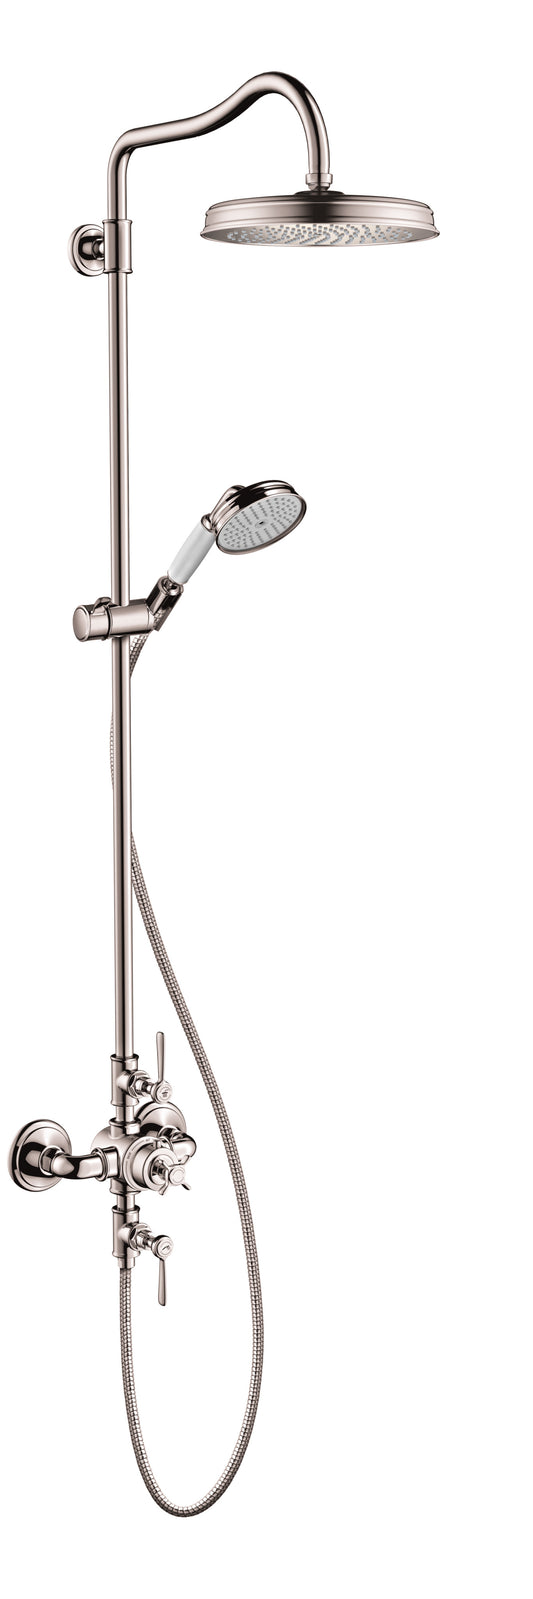 AXOR 16574831 Polished Nickel Montreux Classic Showerpipe 1.8 GPM